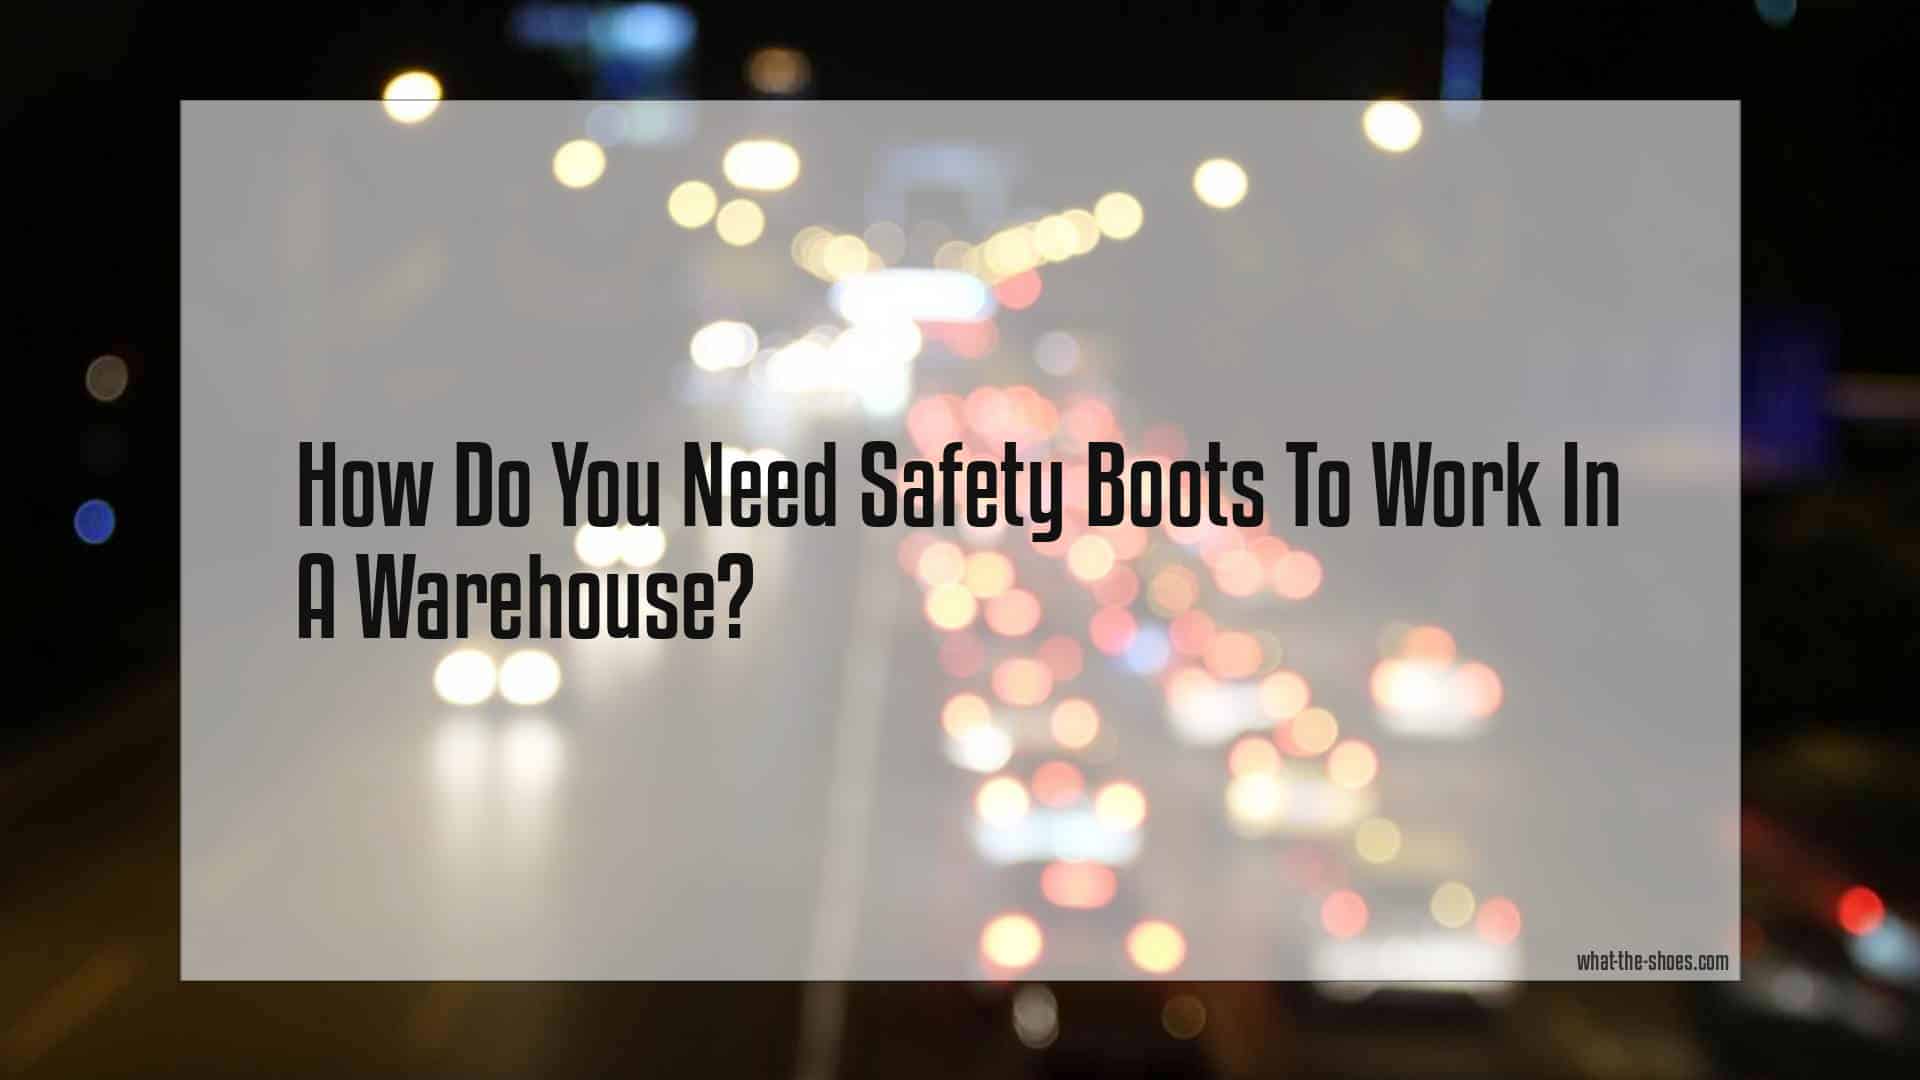 Do You Need Safety Boots To Work In A Warehouse?